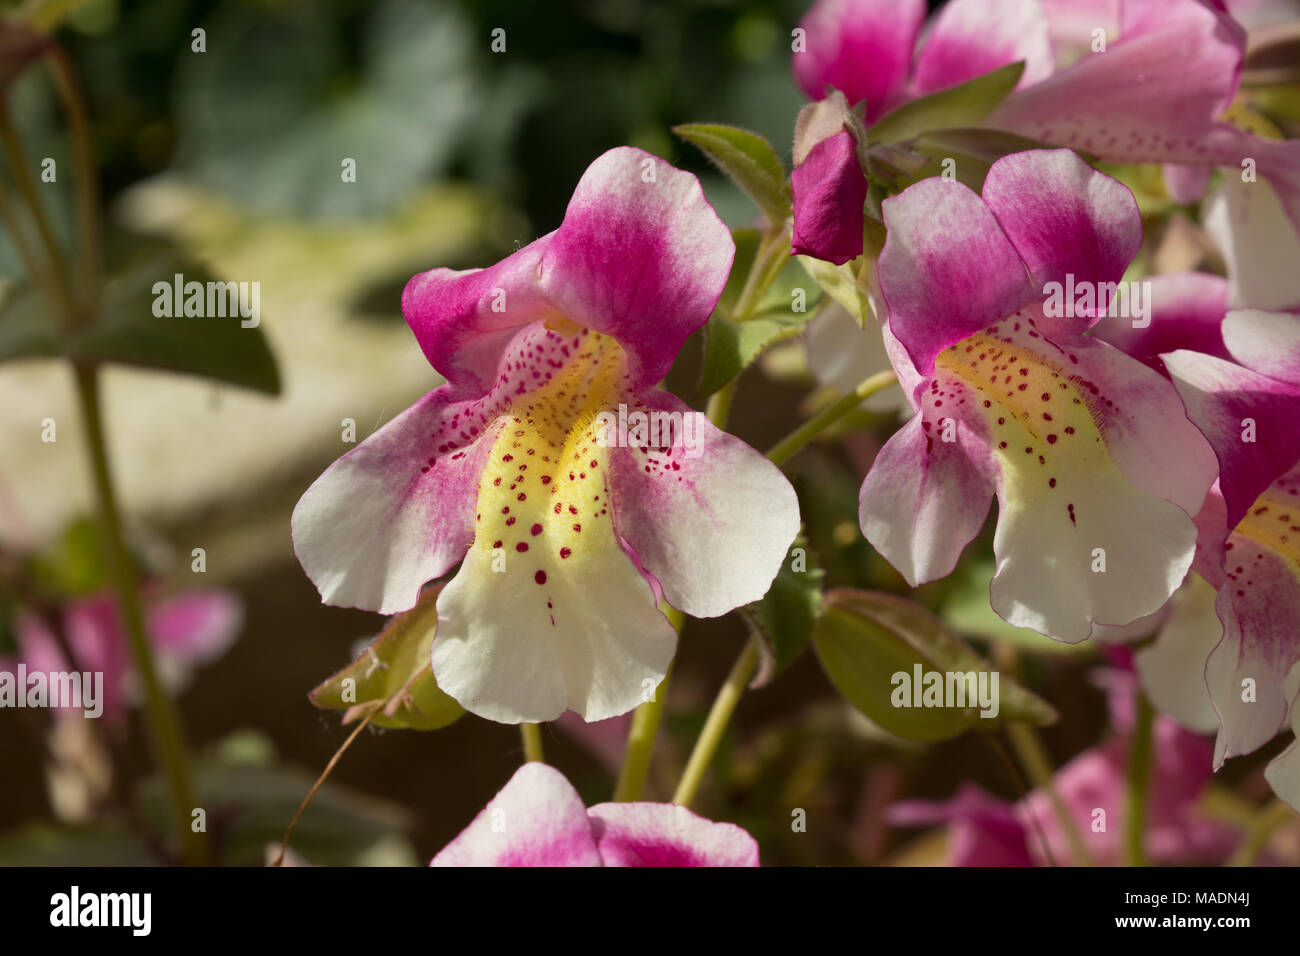 Trumpet-shaped pink and white Mimulus naiandinus Chilean monkey flowers. Stock Photo